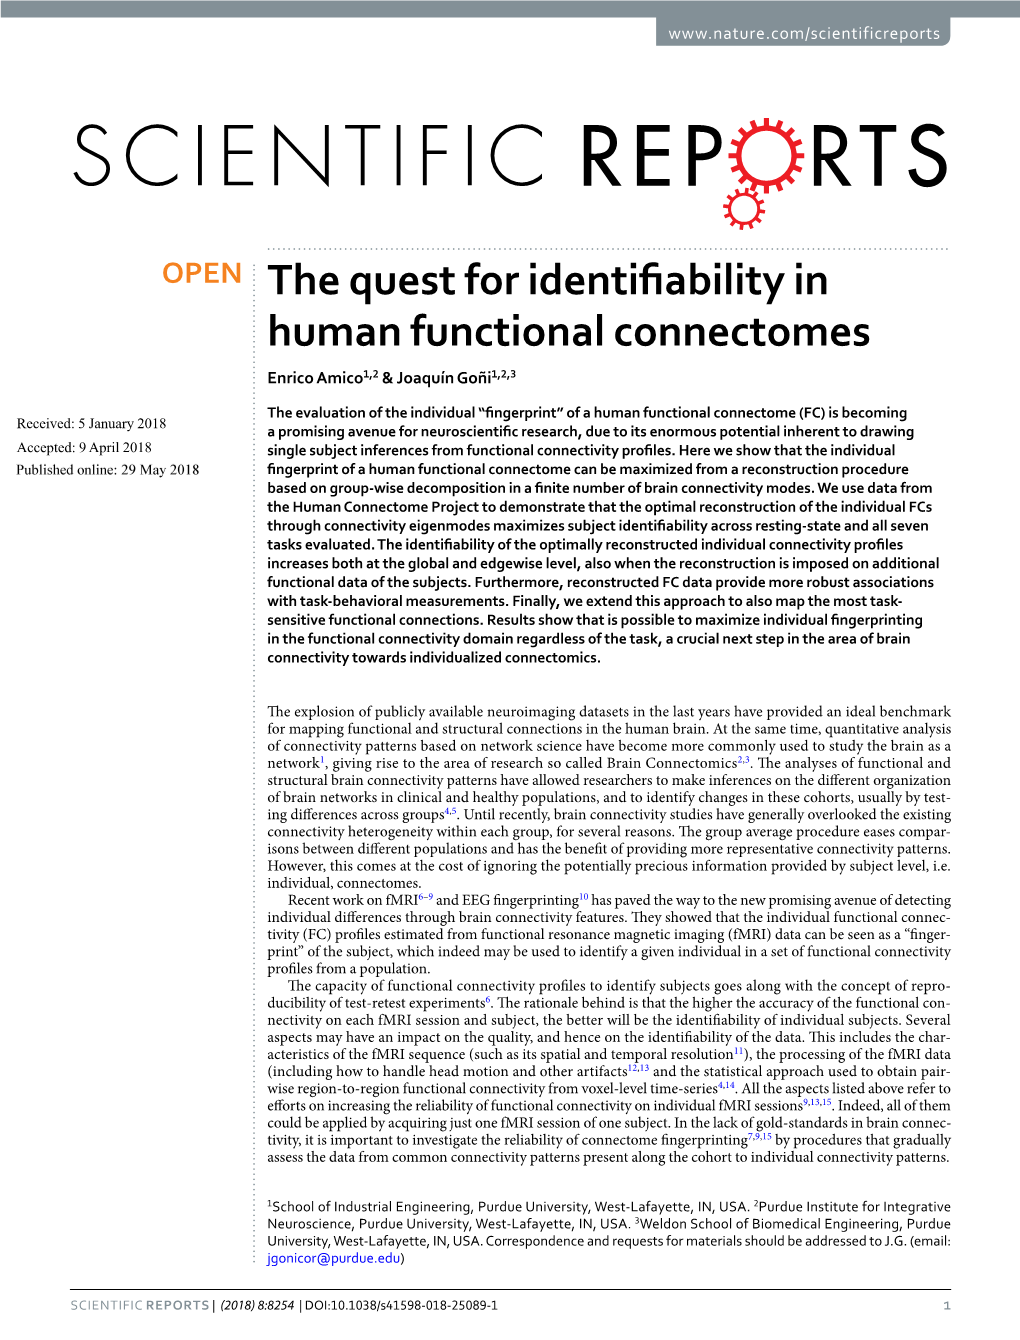 The Quest for Identifiability in Human Functional Connectomes